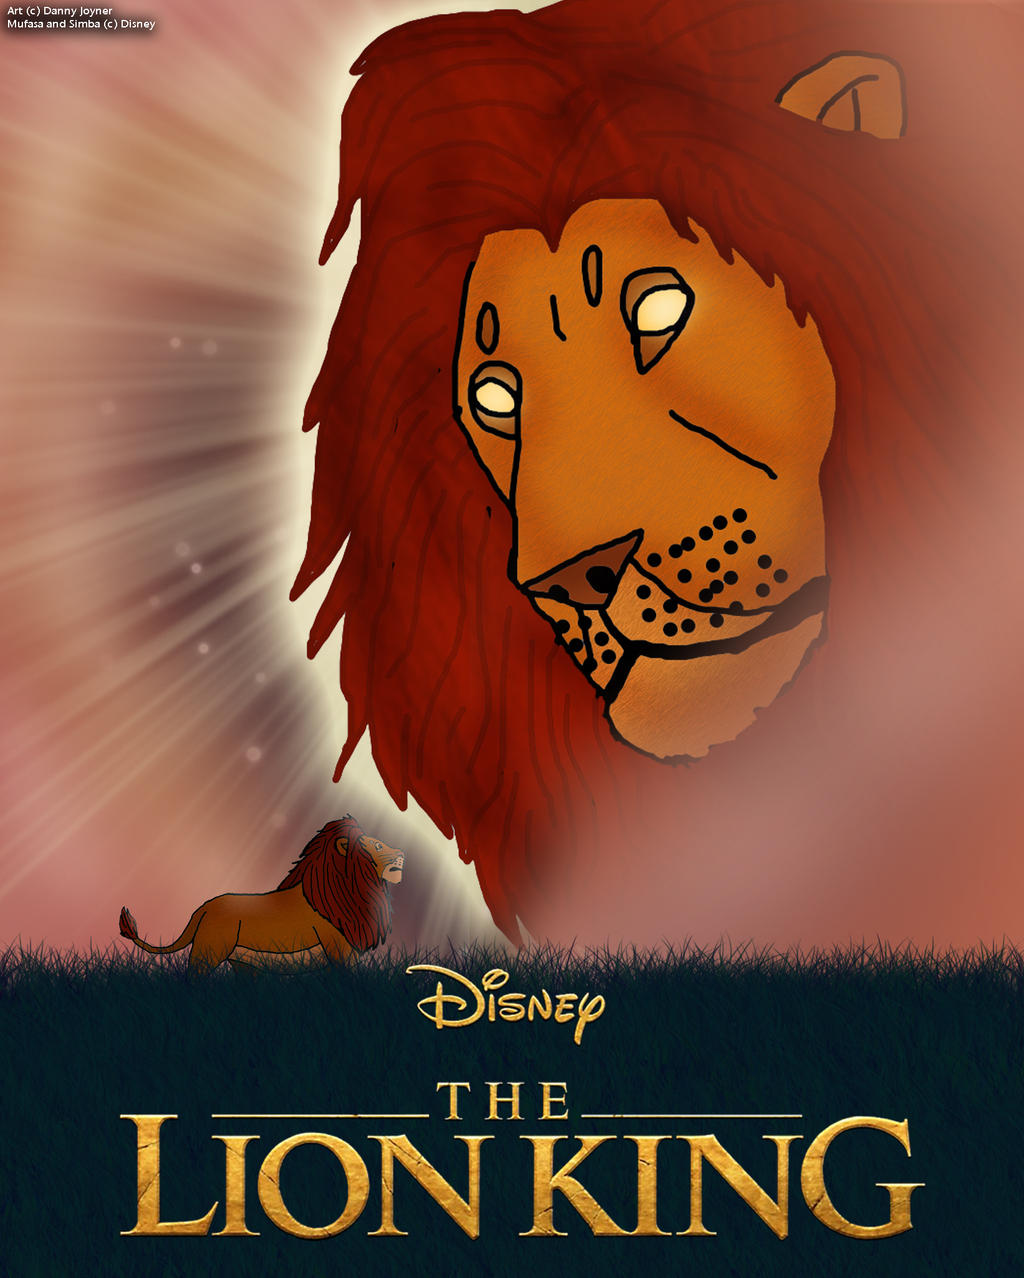 The Lion King 19 Poster Mufasa S Ghost By Rdj1995 On Deviantart